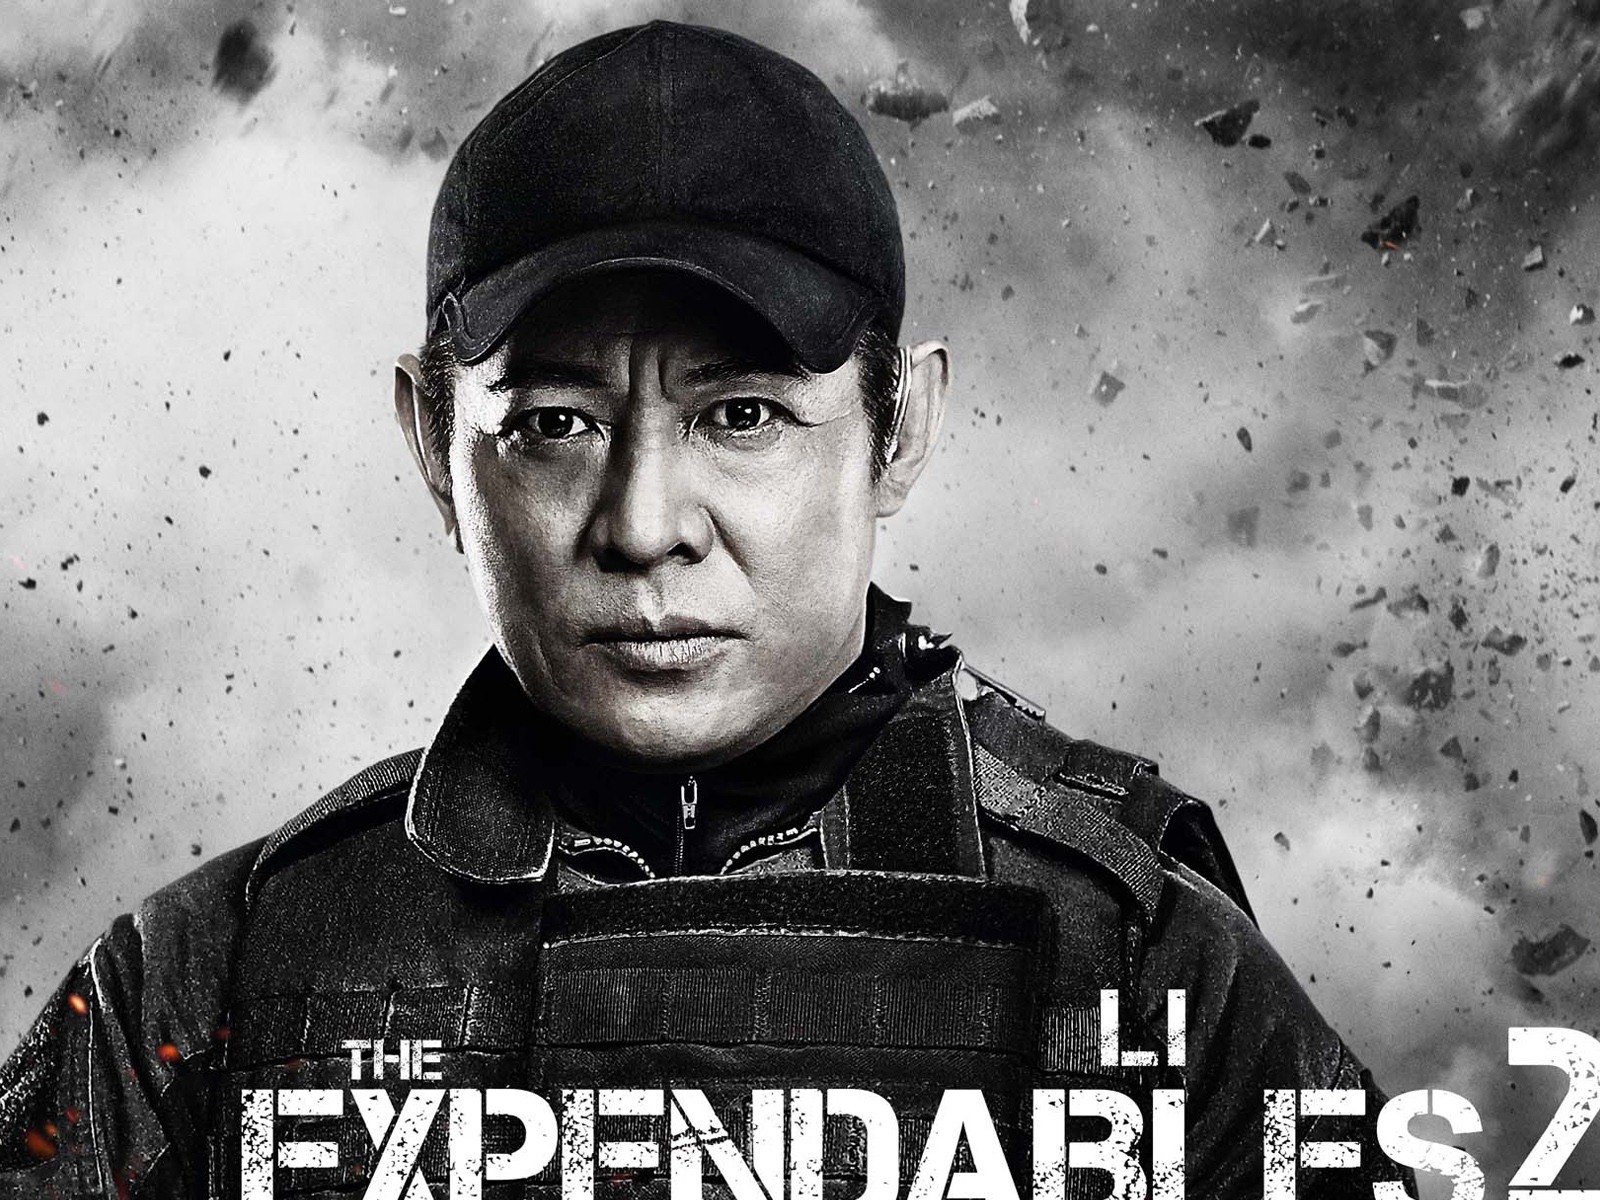 2012 The Expendables 2 敢死队2 高清壁纸16 - 1600x1200